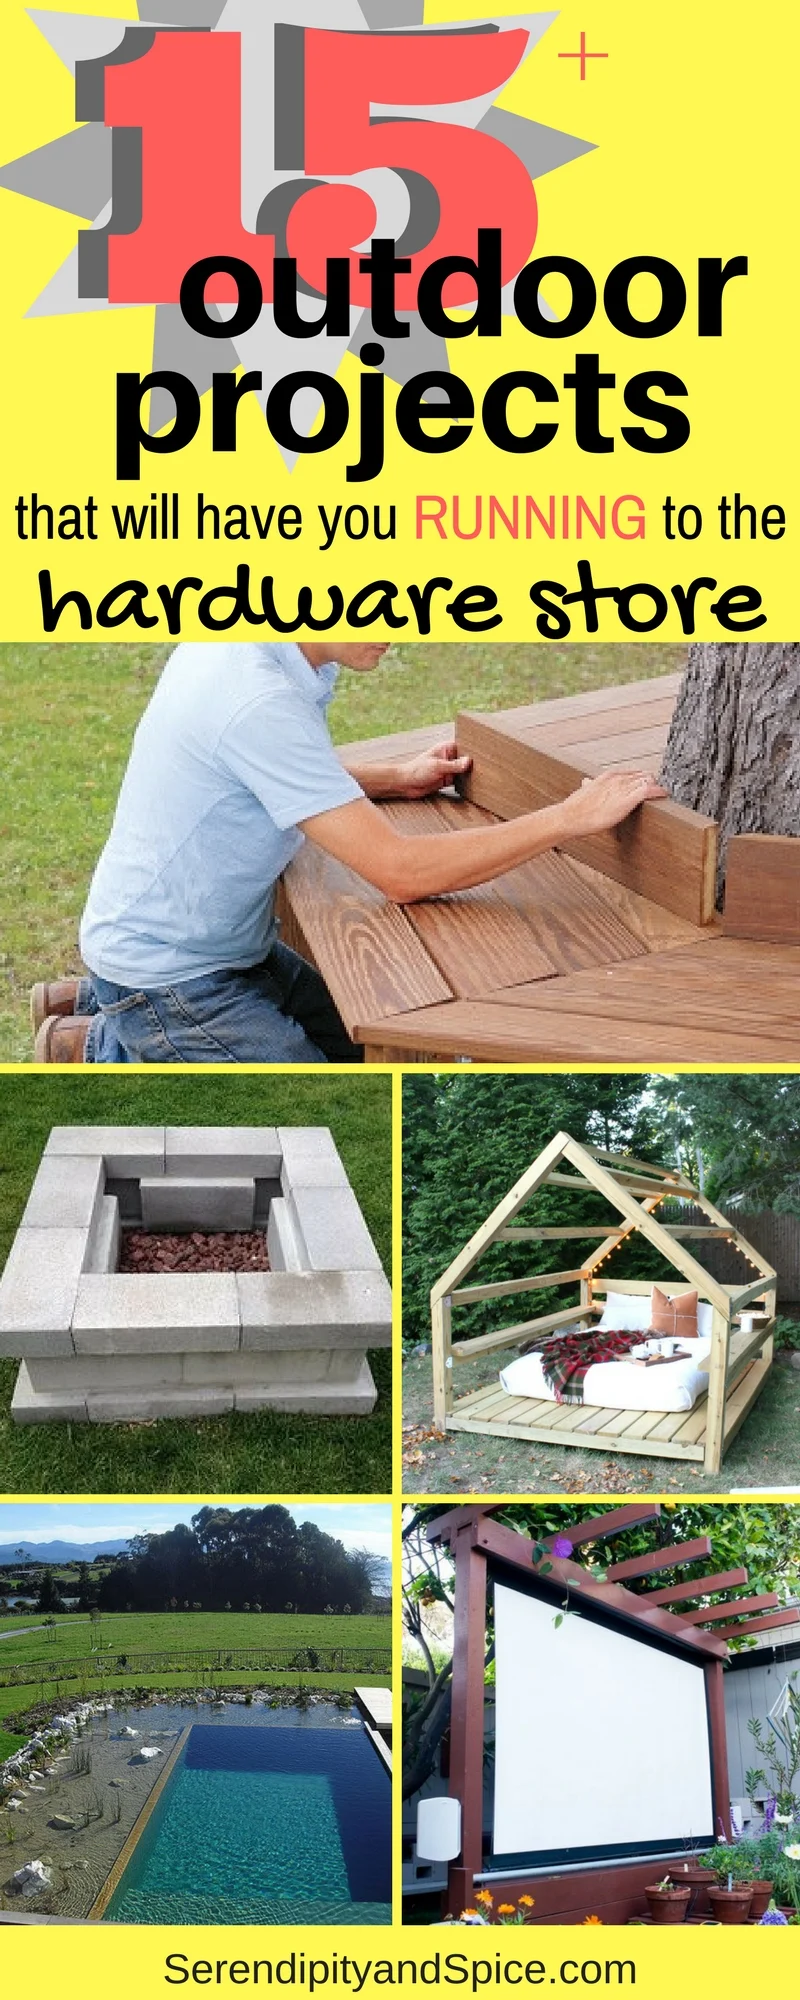 DIY outdoor projects that are amazing and will make your summer epic!